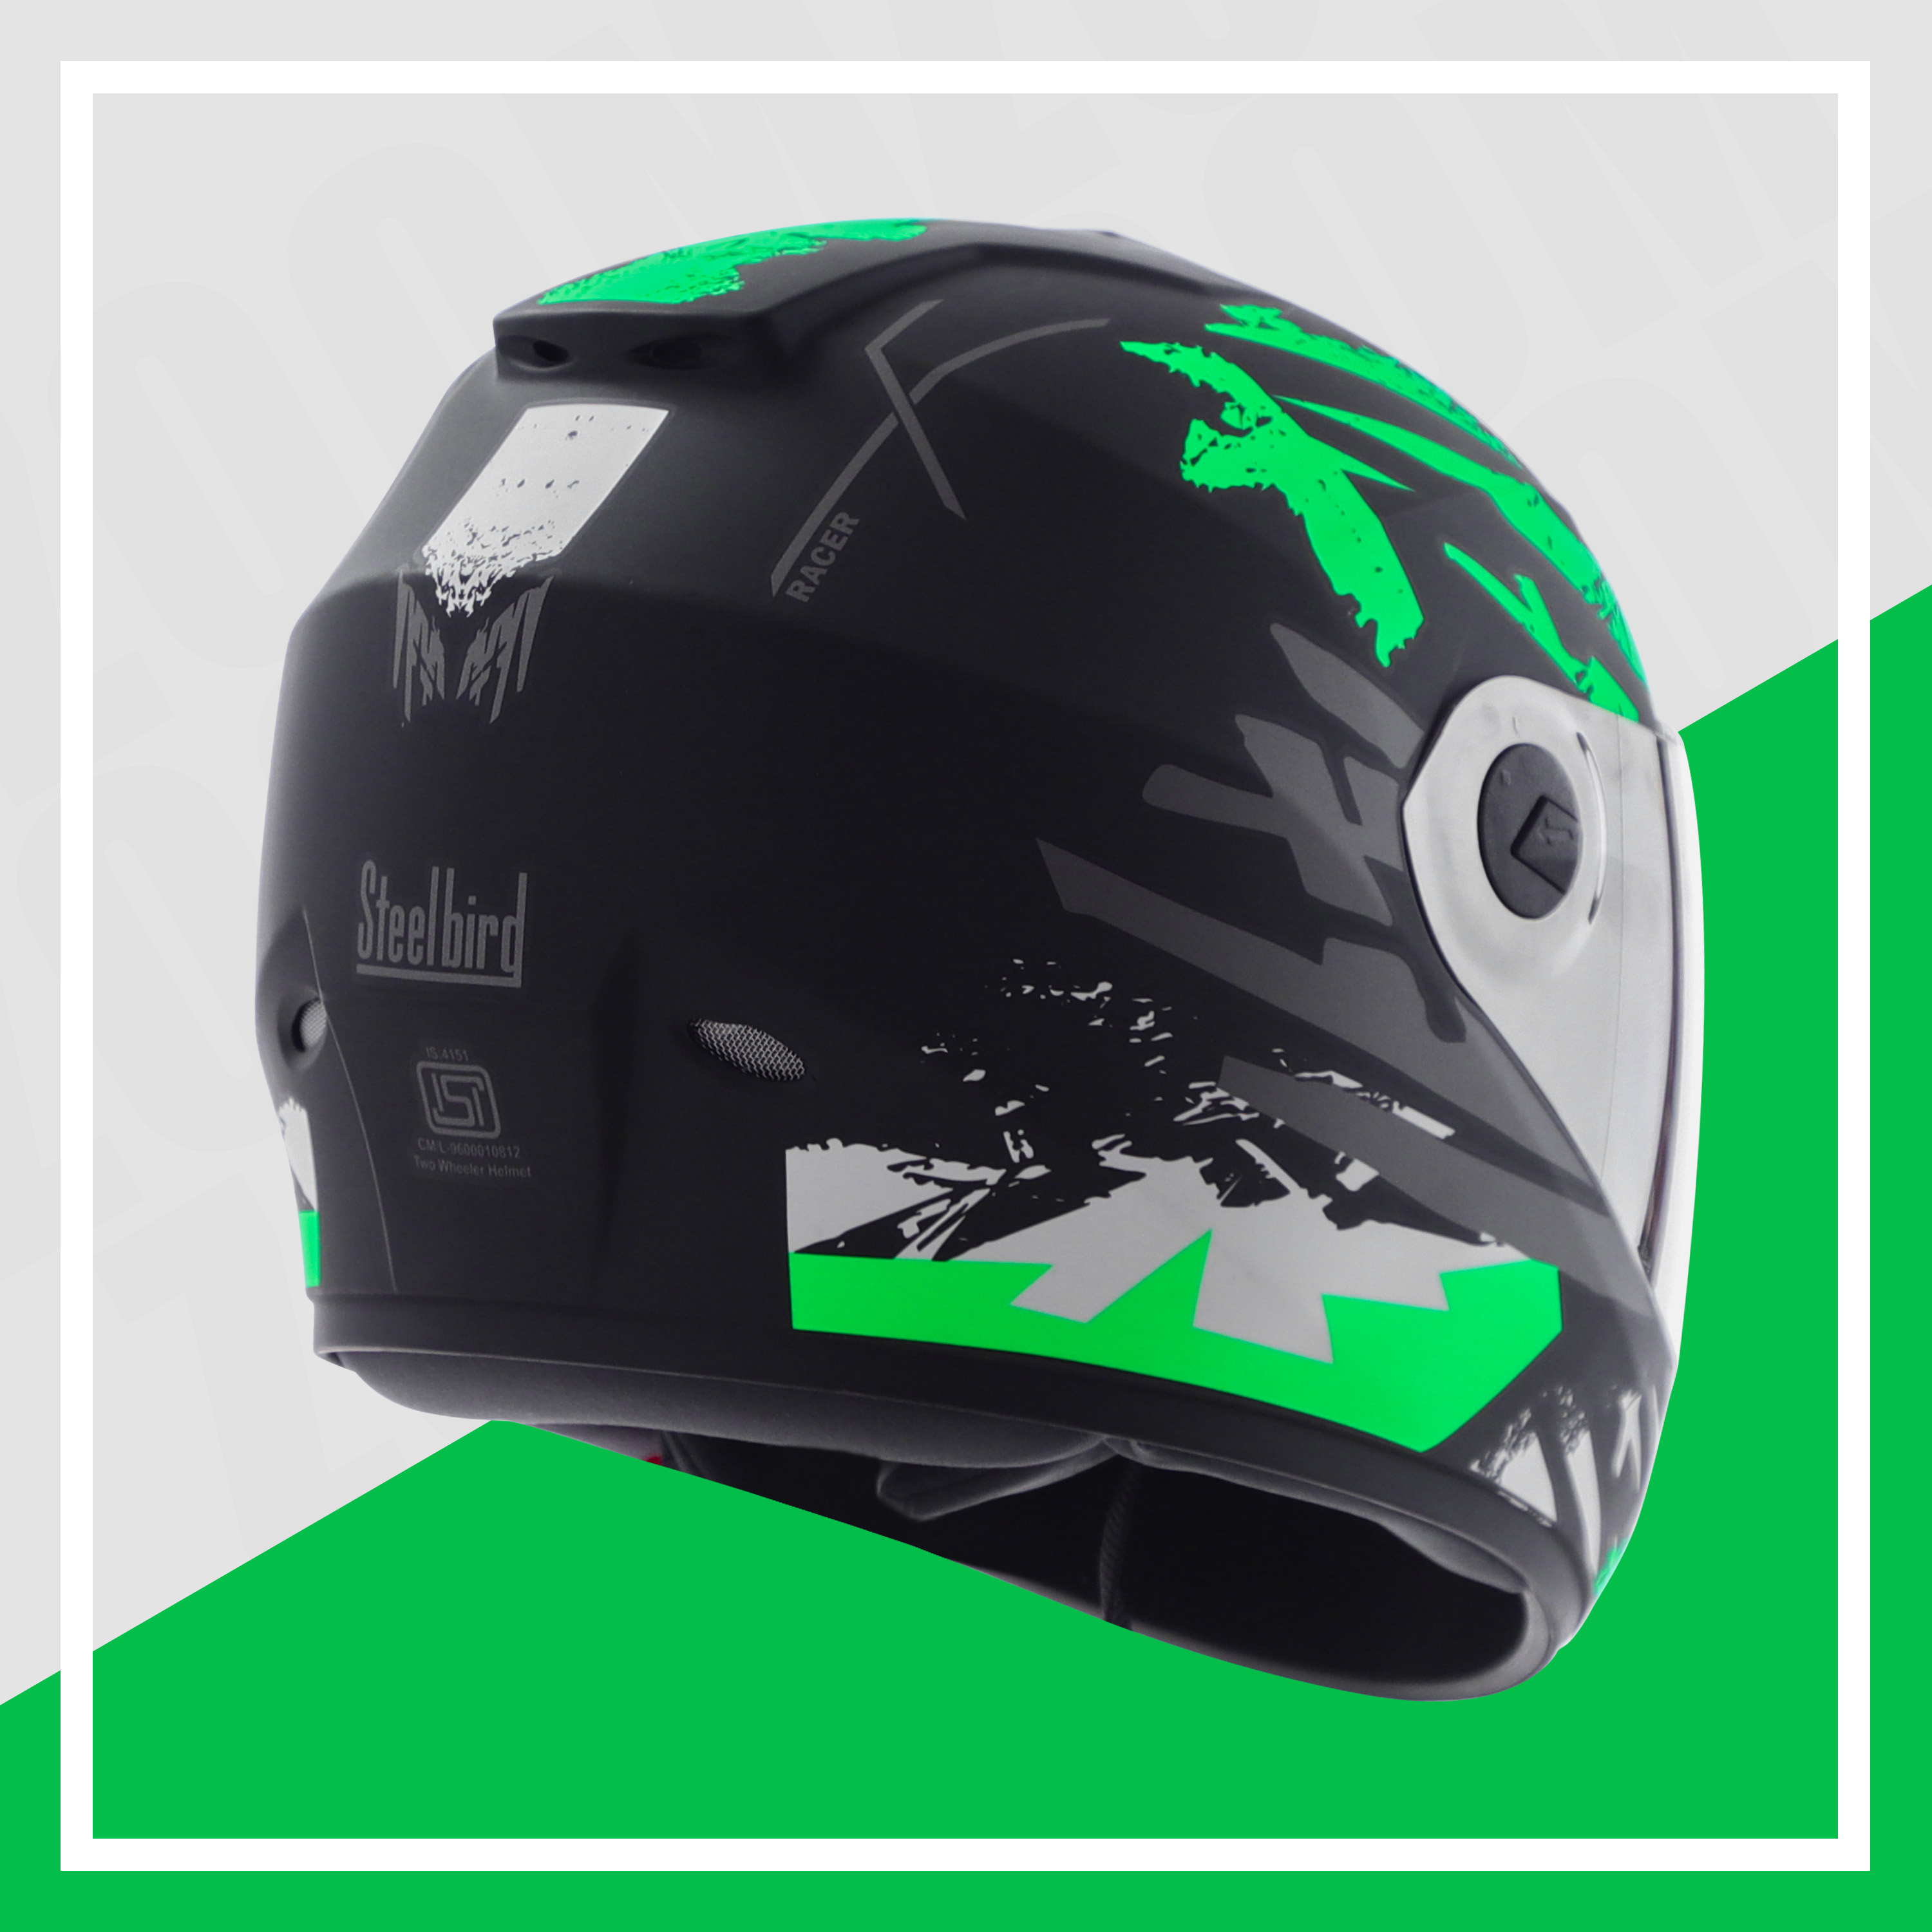 Steelbird SBH-11 Zoom Racer ISI Certified Full Face Graphic Helmet For Men And Women (Glossy Black Green With Chrome Silver Visor)